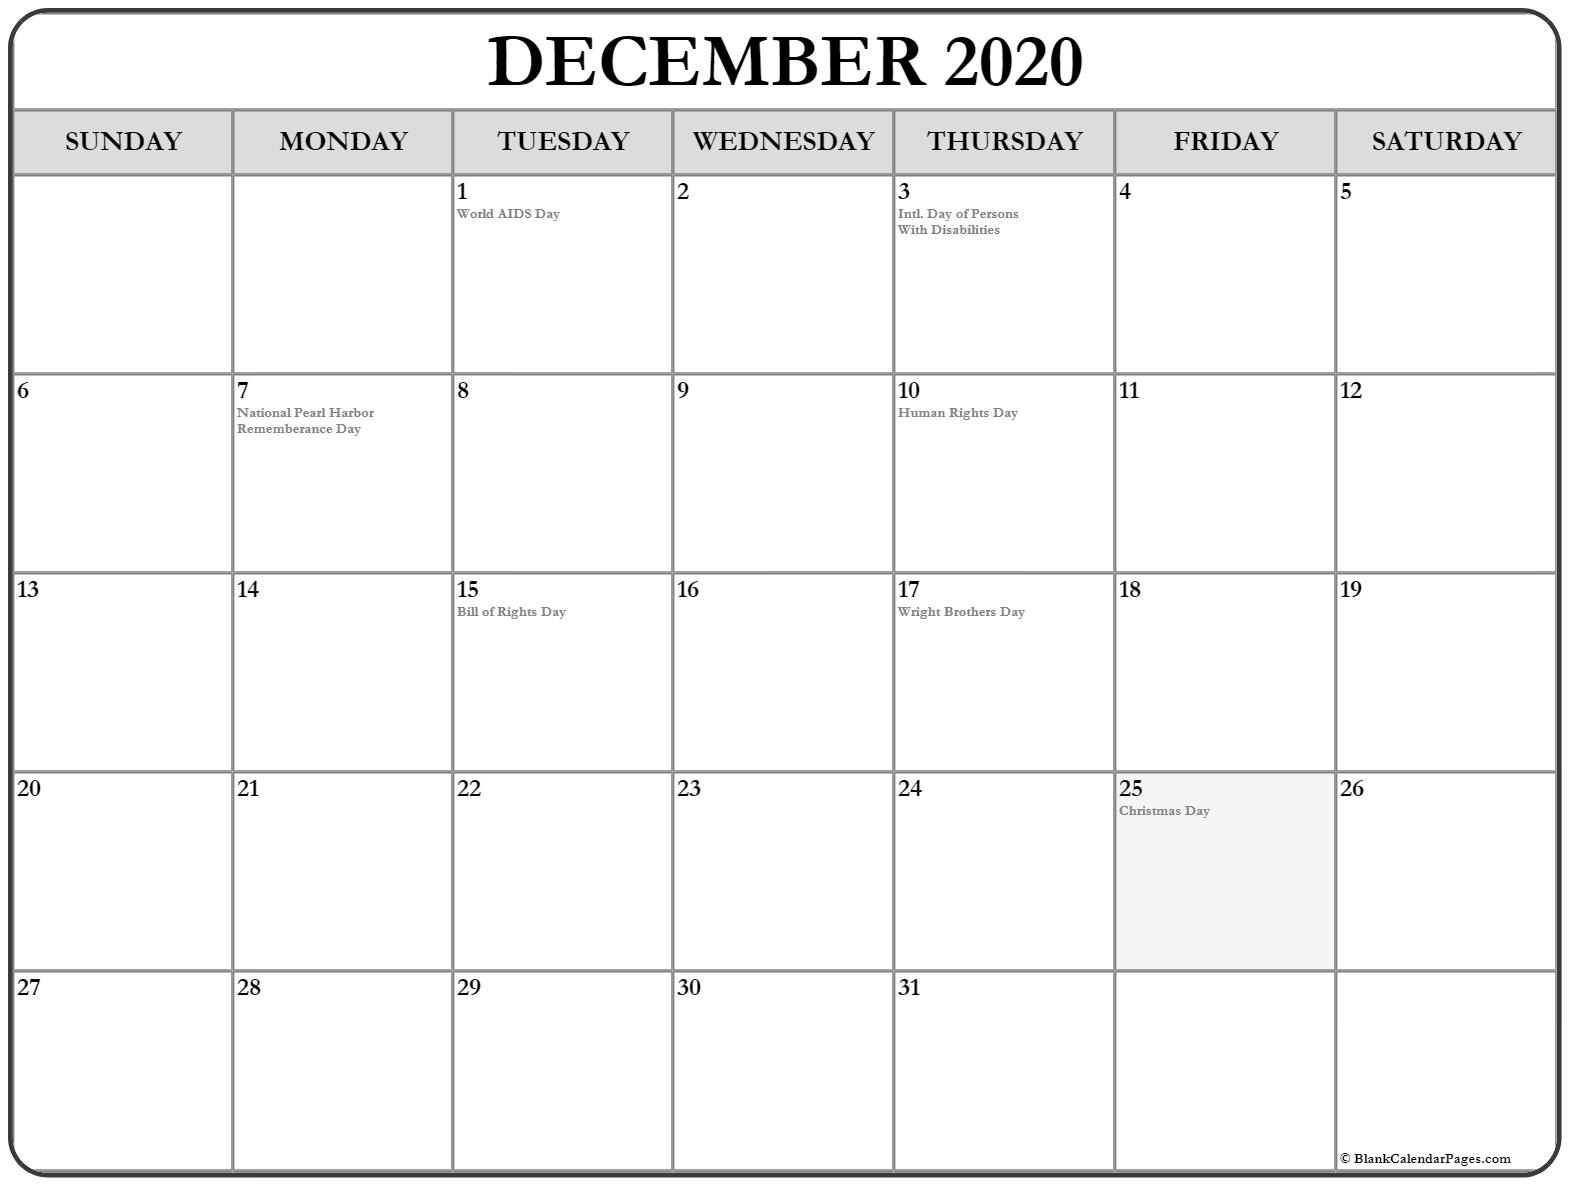 Collection Of December 2020 Calendars With Holidays December 2020 Calendar Boxing Day